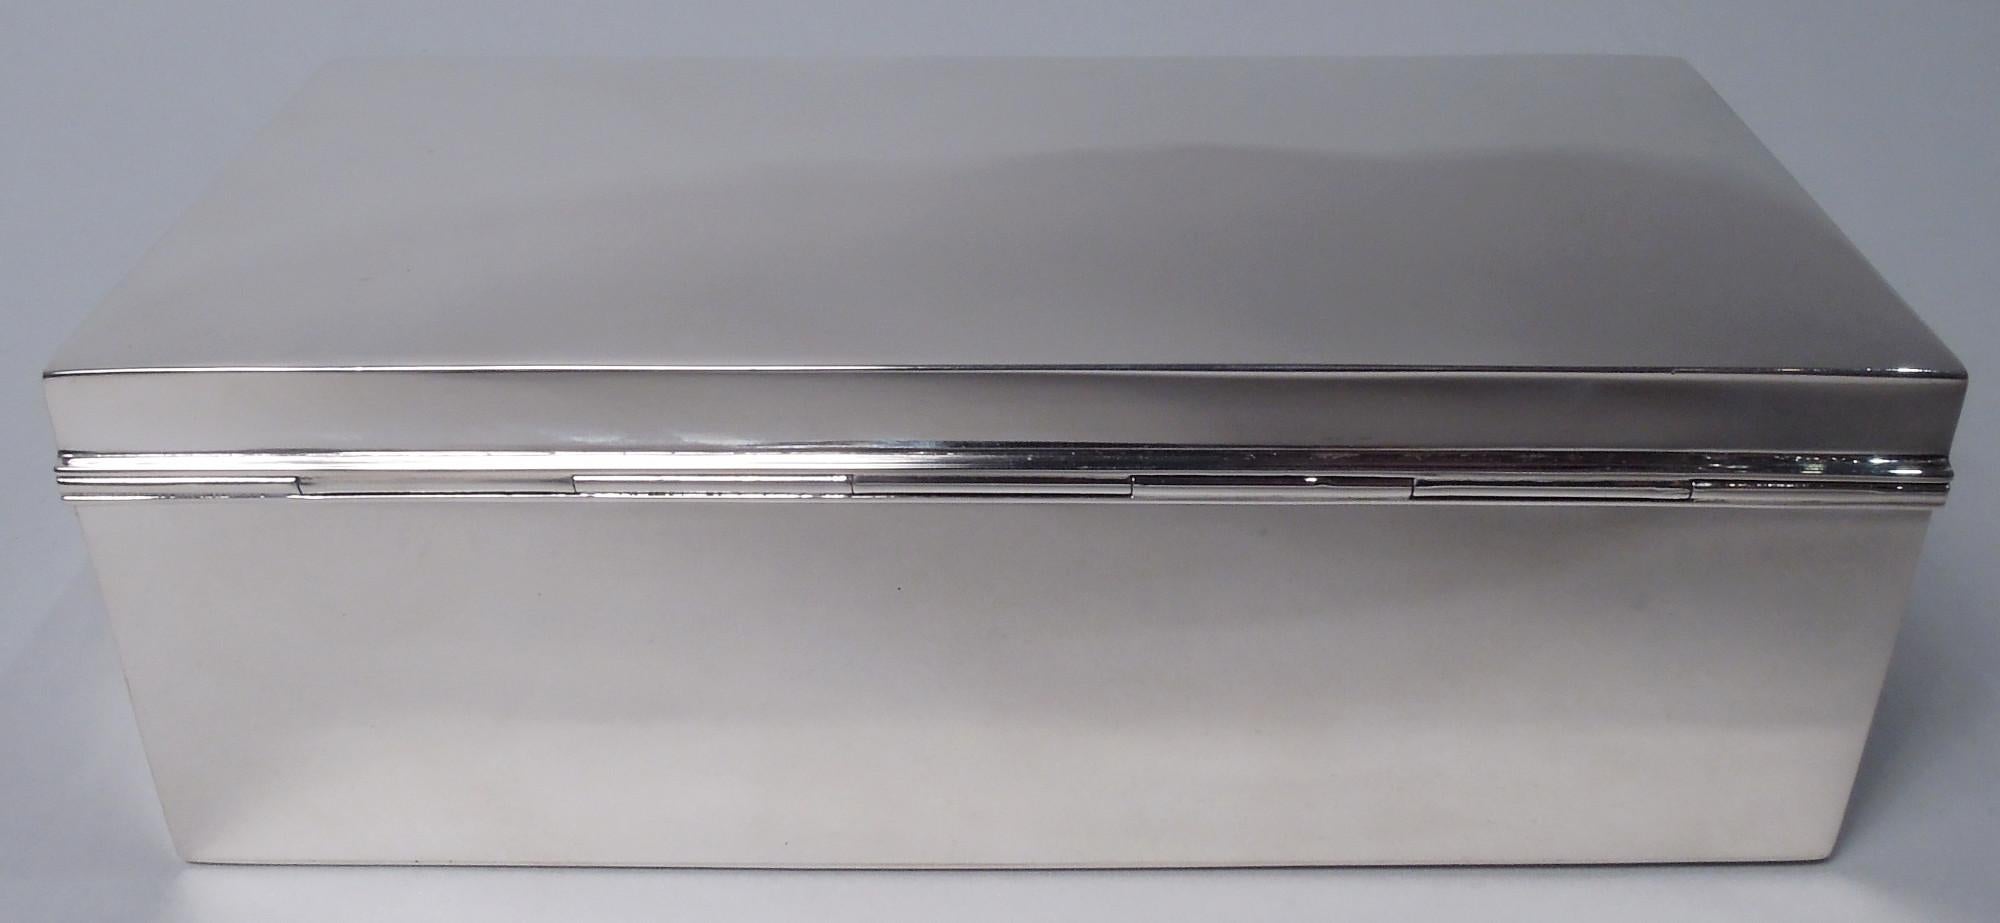 Modern sterling silver jewelry box. Made by Watrous Mfg. Co. (part of International) in Wallingford, Conn., ca 1950. Rectangular with straight sides. Cover hinged and tabbed with gently curved top. Velvet-lined interior. Fully marked including